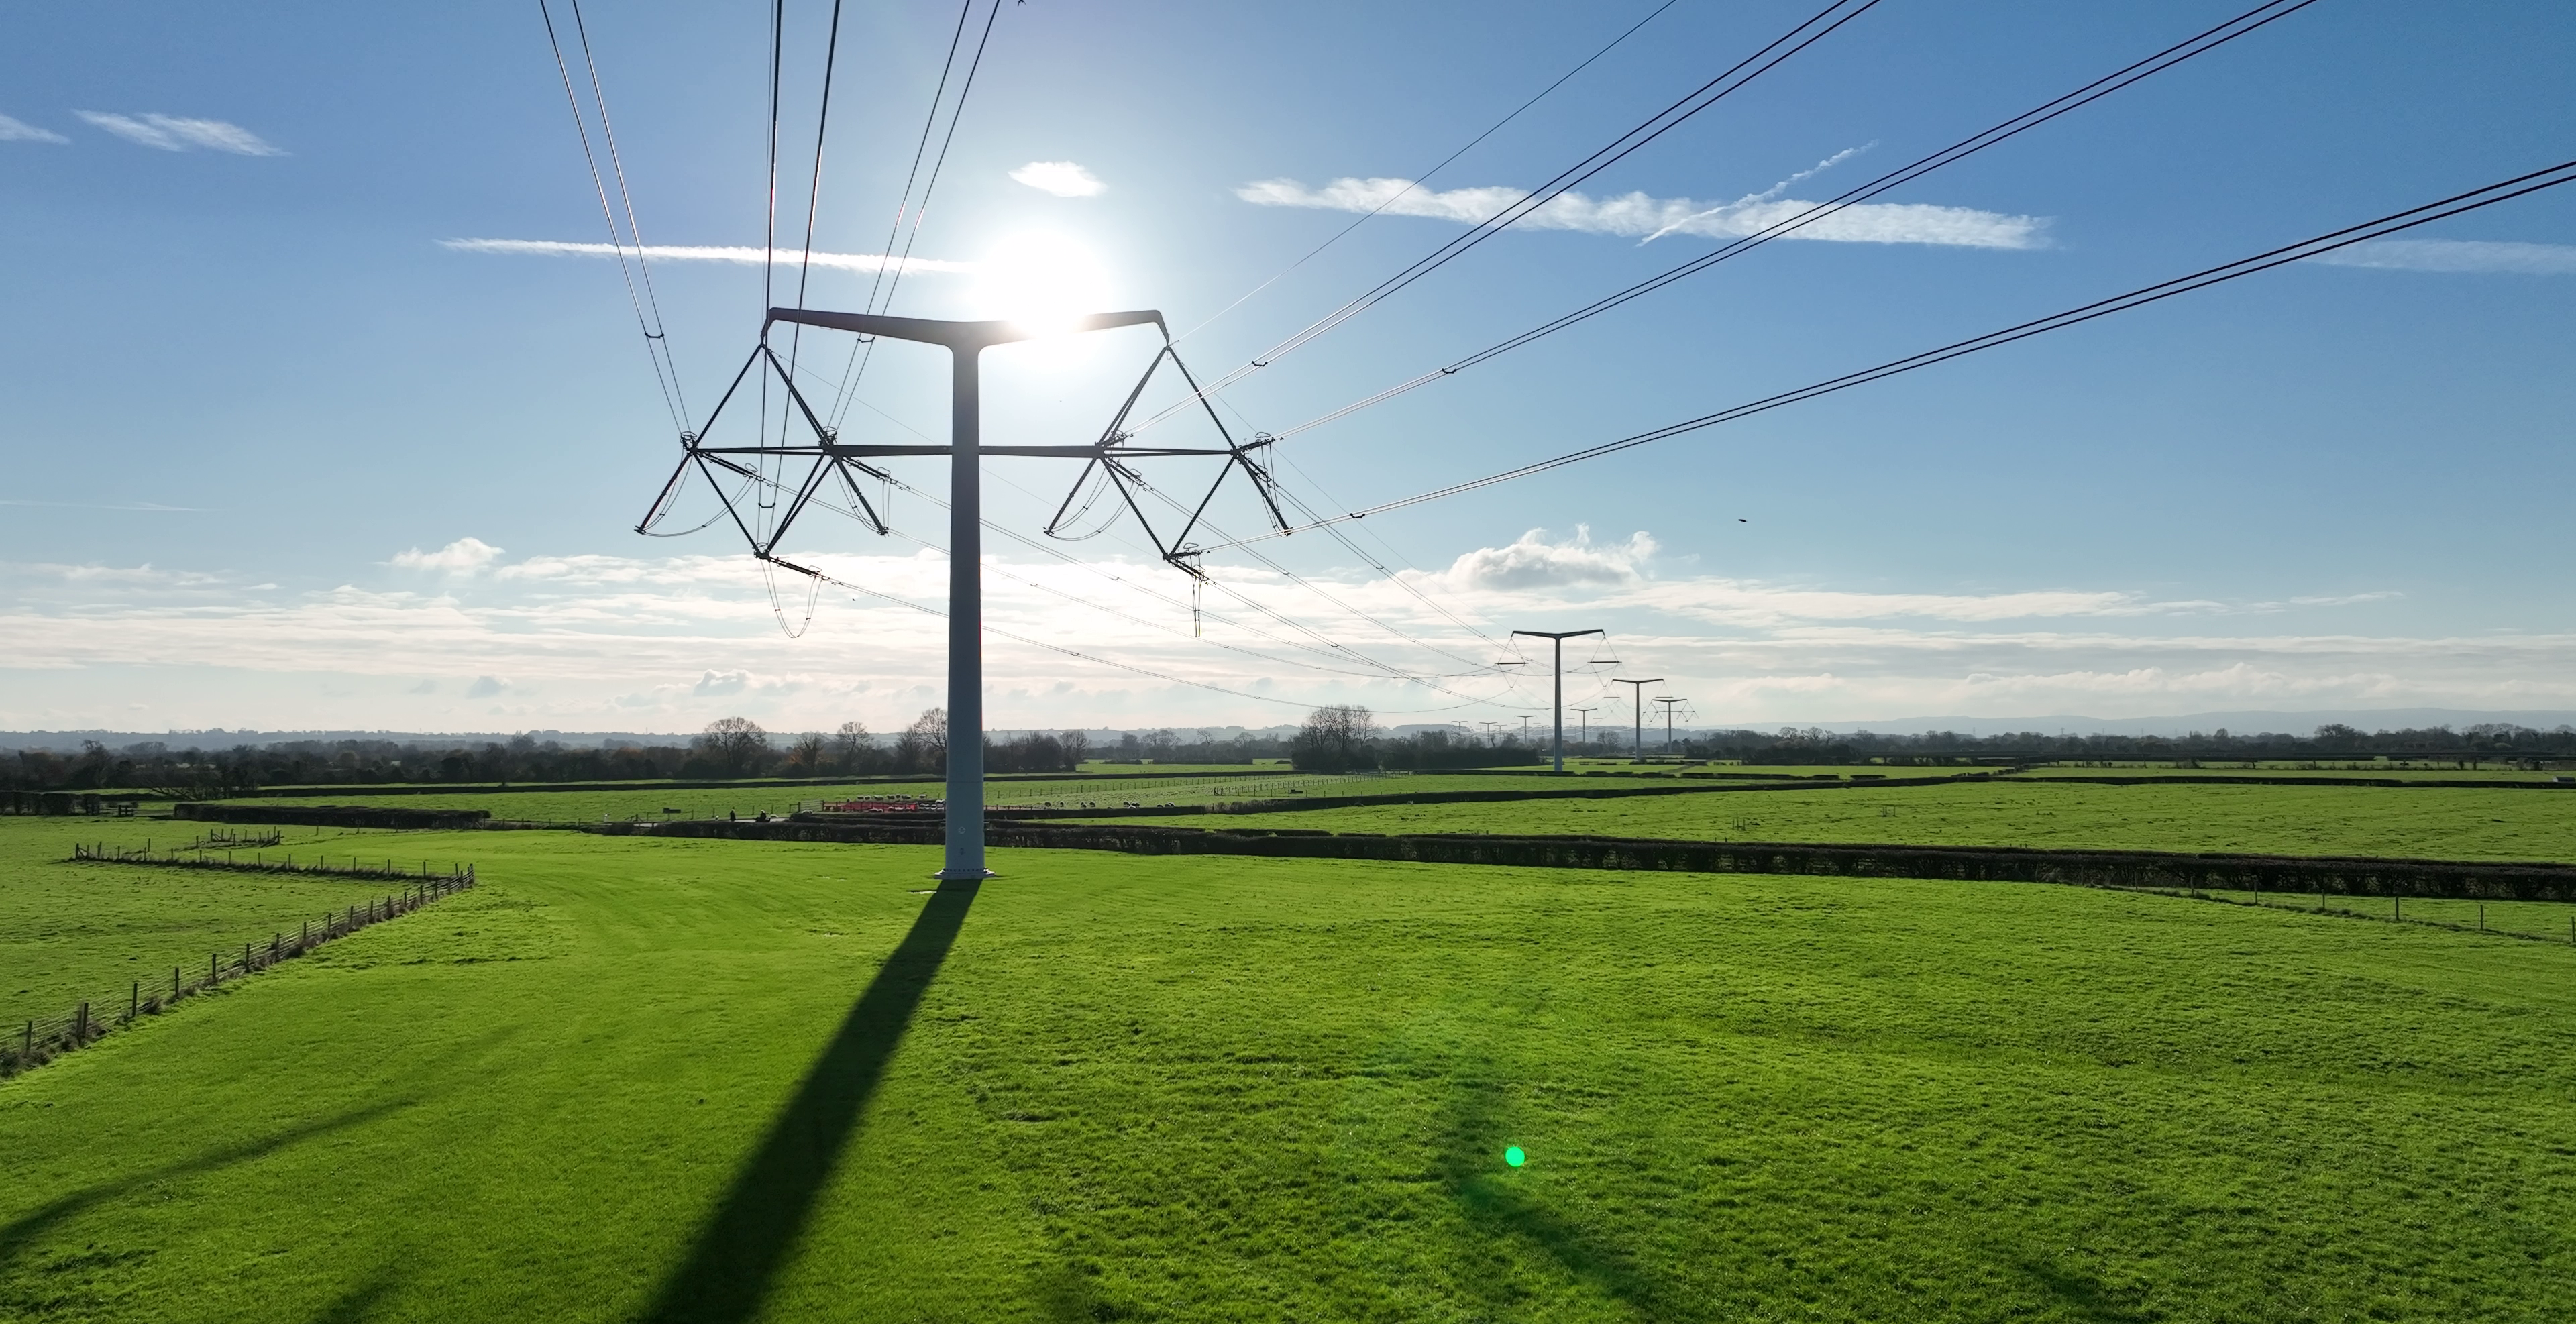 T-pylons and overhead electricity lines in the sunshine in green fields